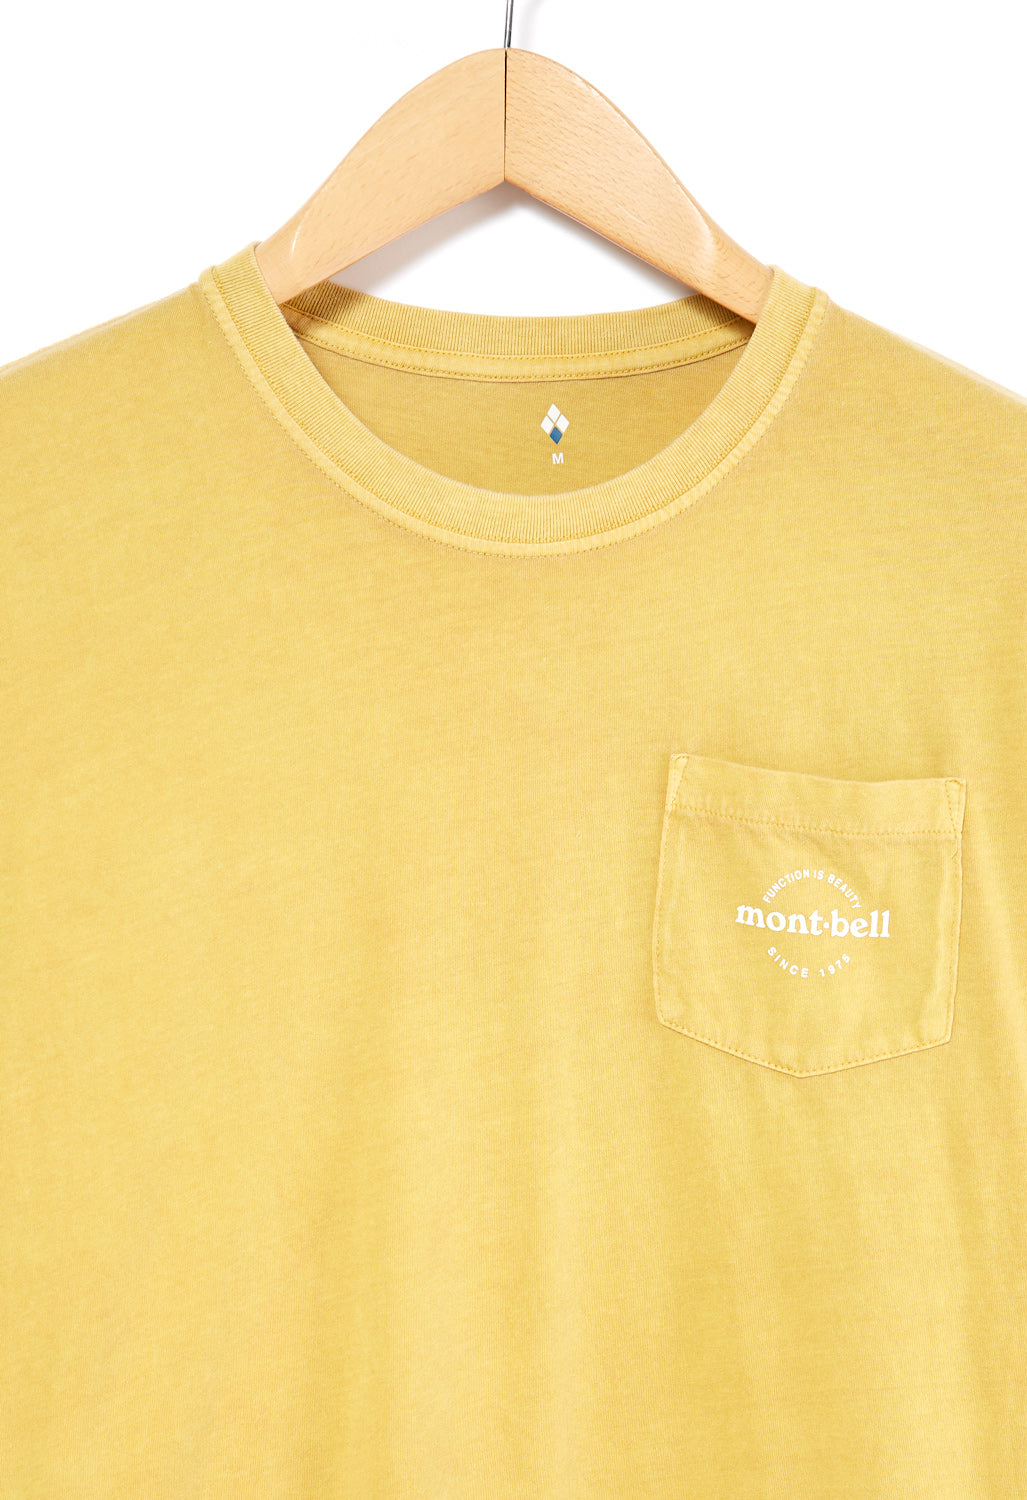 Montbell Men's Wash Out Cotton T-Shirt - Yellow